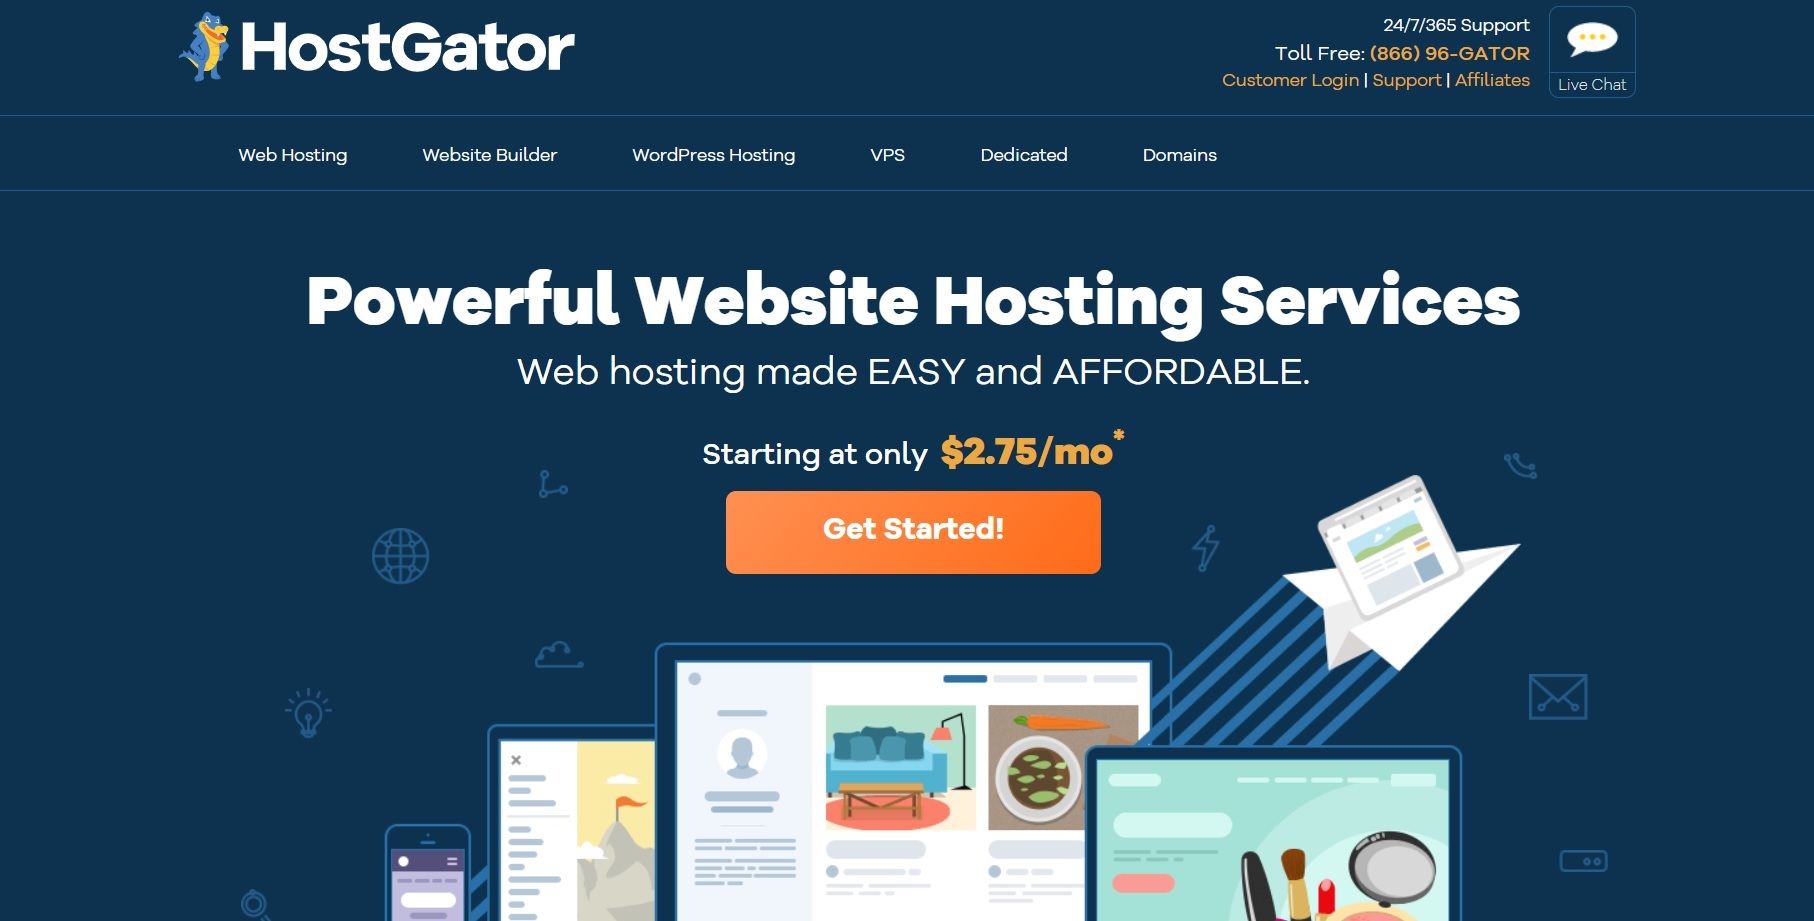 Do you know what is the best blogging platform to make money? Hostgator is not bad.